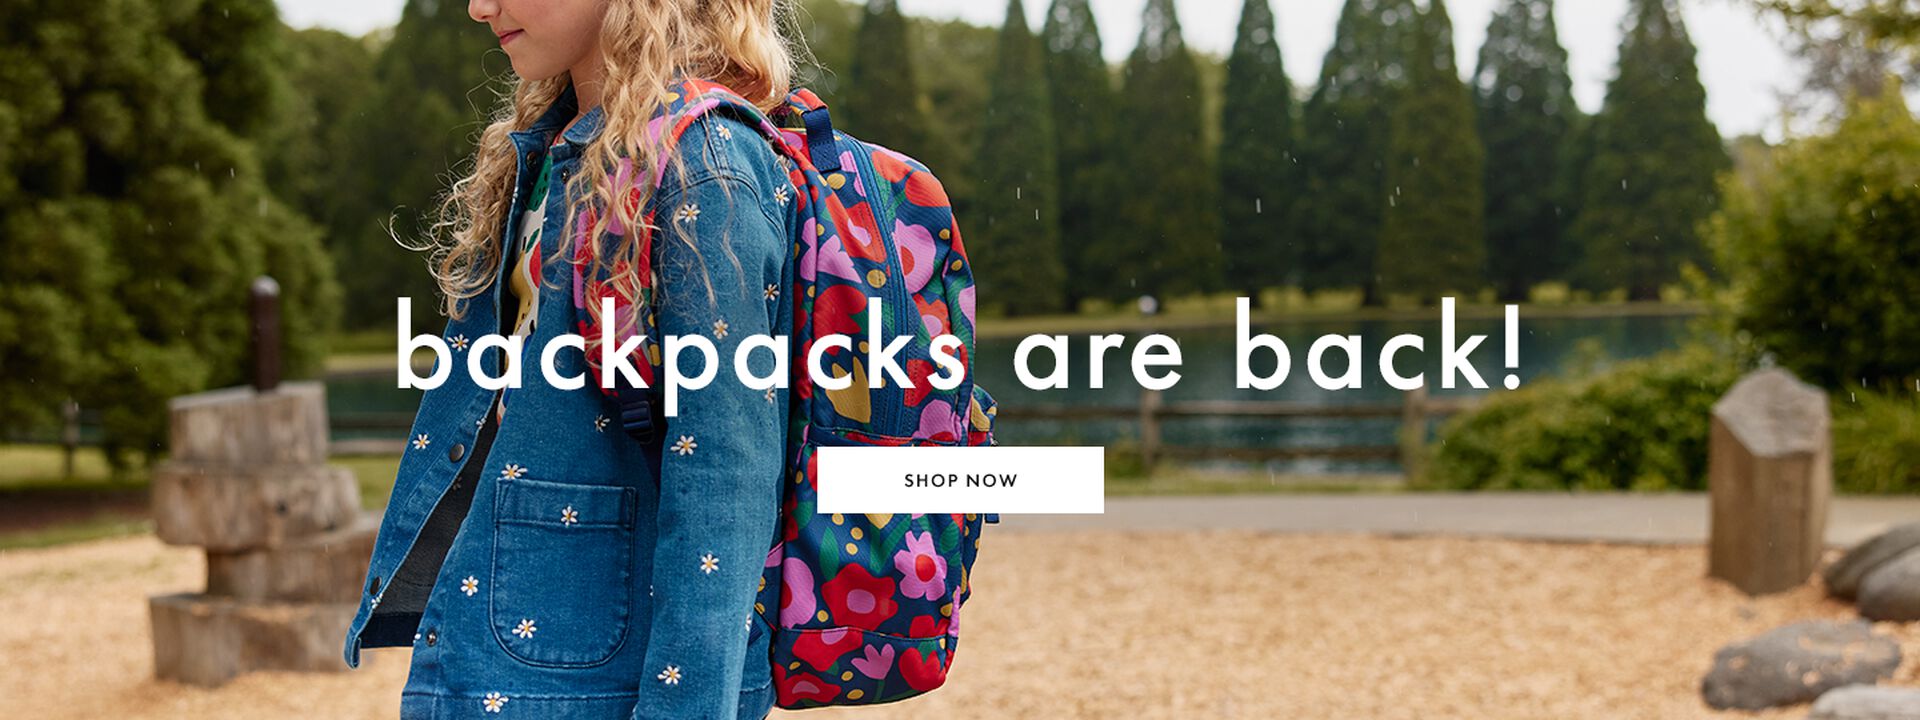 Backpacks are back! Shop now